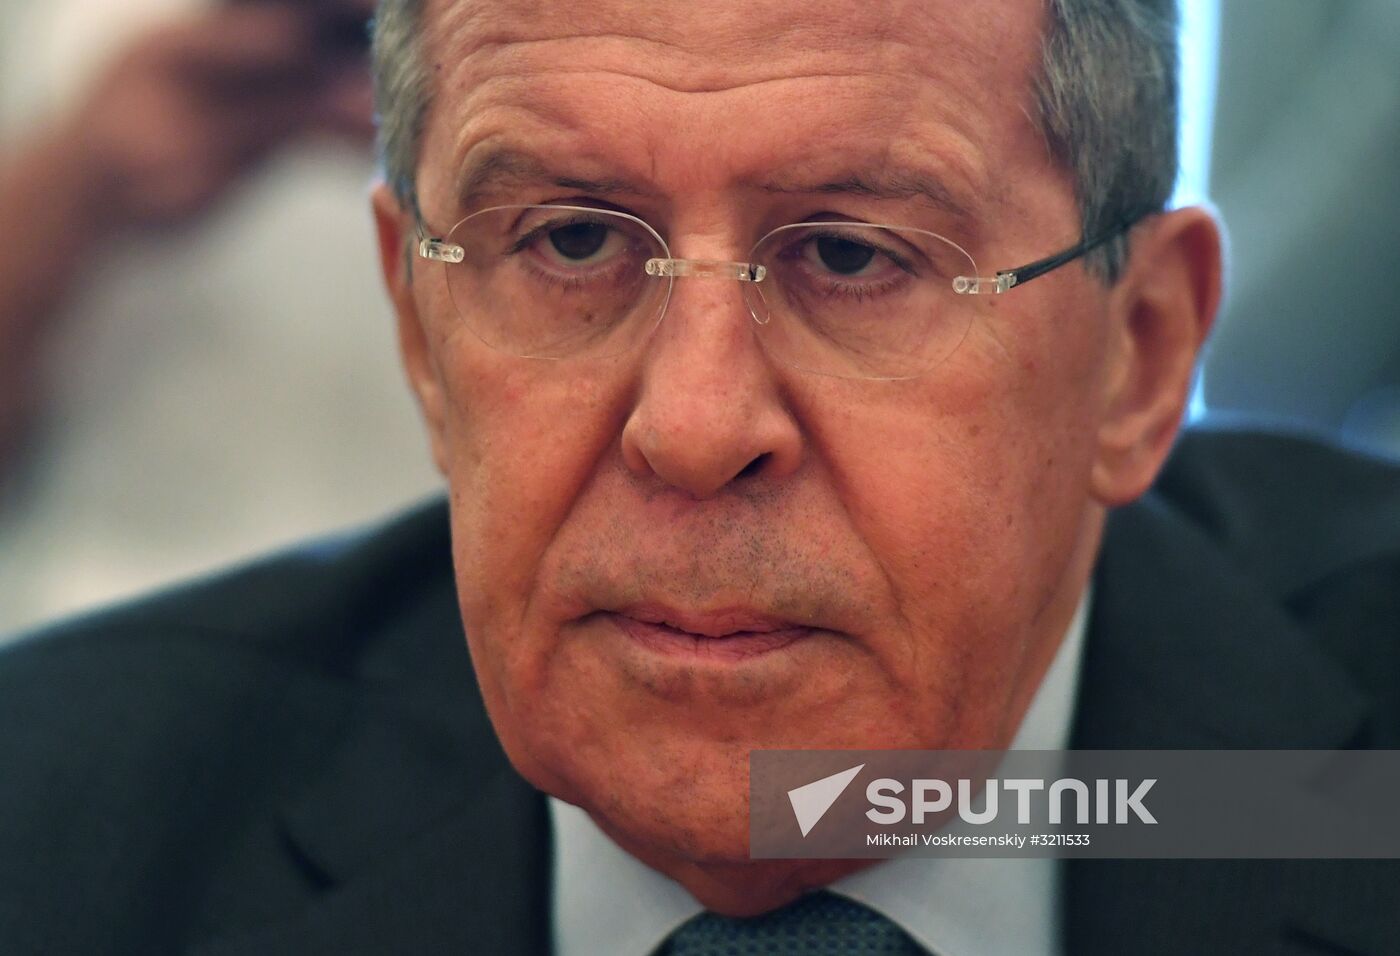 Foreign Minister Sergei Lavrov's meetings in Moscow